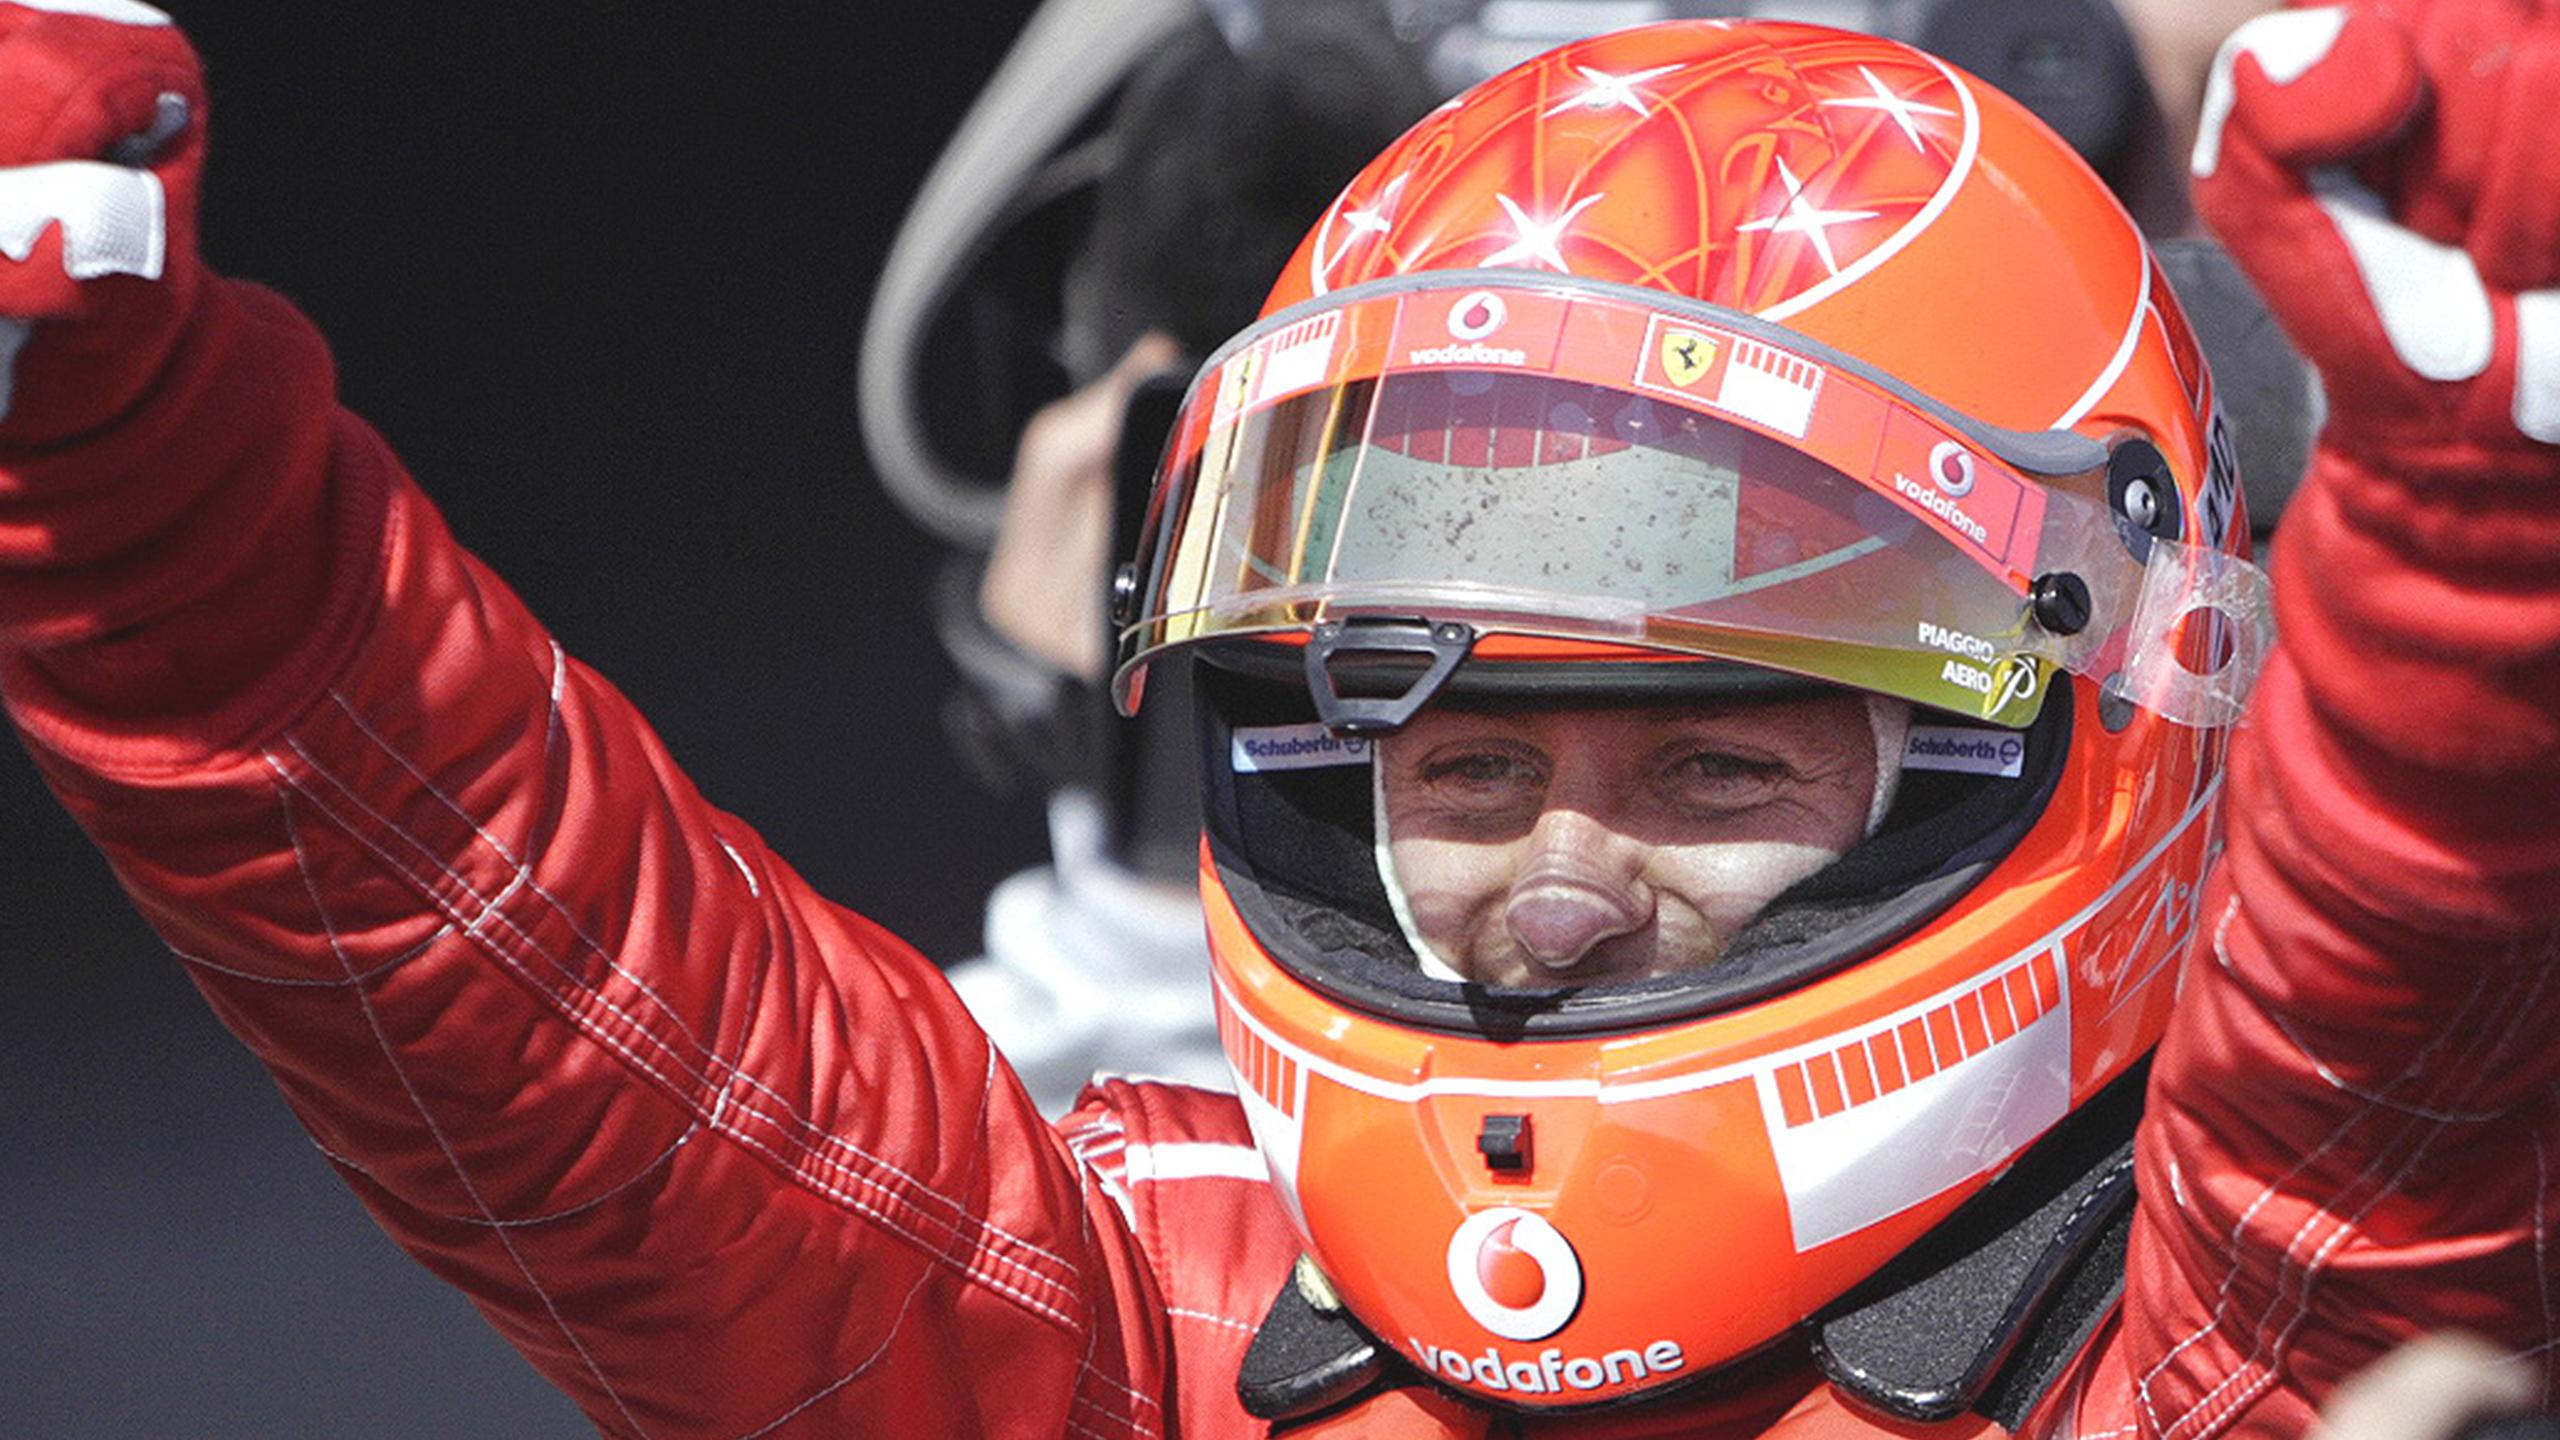 FACTS AND STATS: First Ferrari podium in Imola since Schumacher in 2006 sends the Tifosi wild